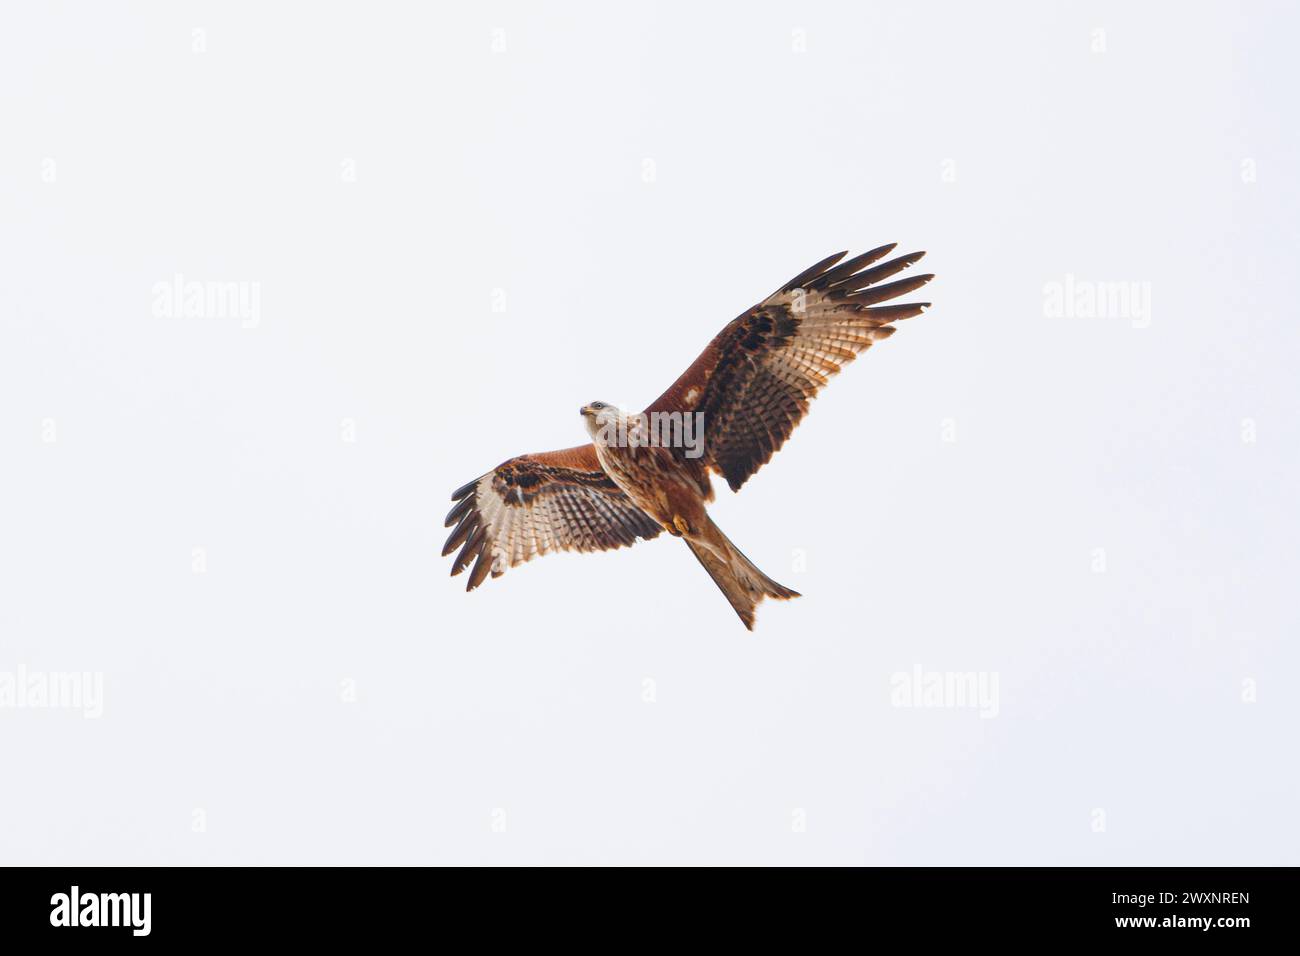 A Red Kite flying against a white background Stock Photo